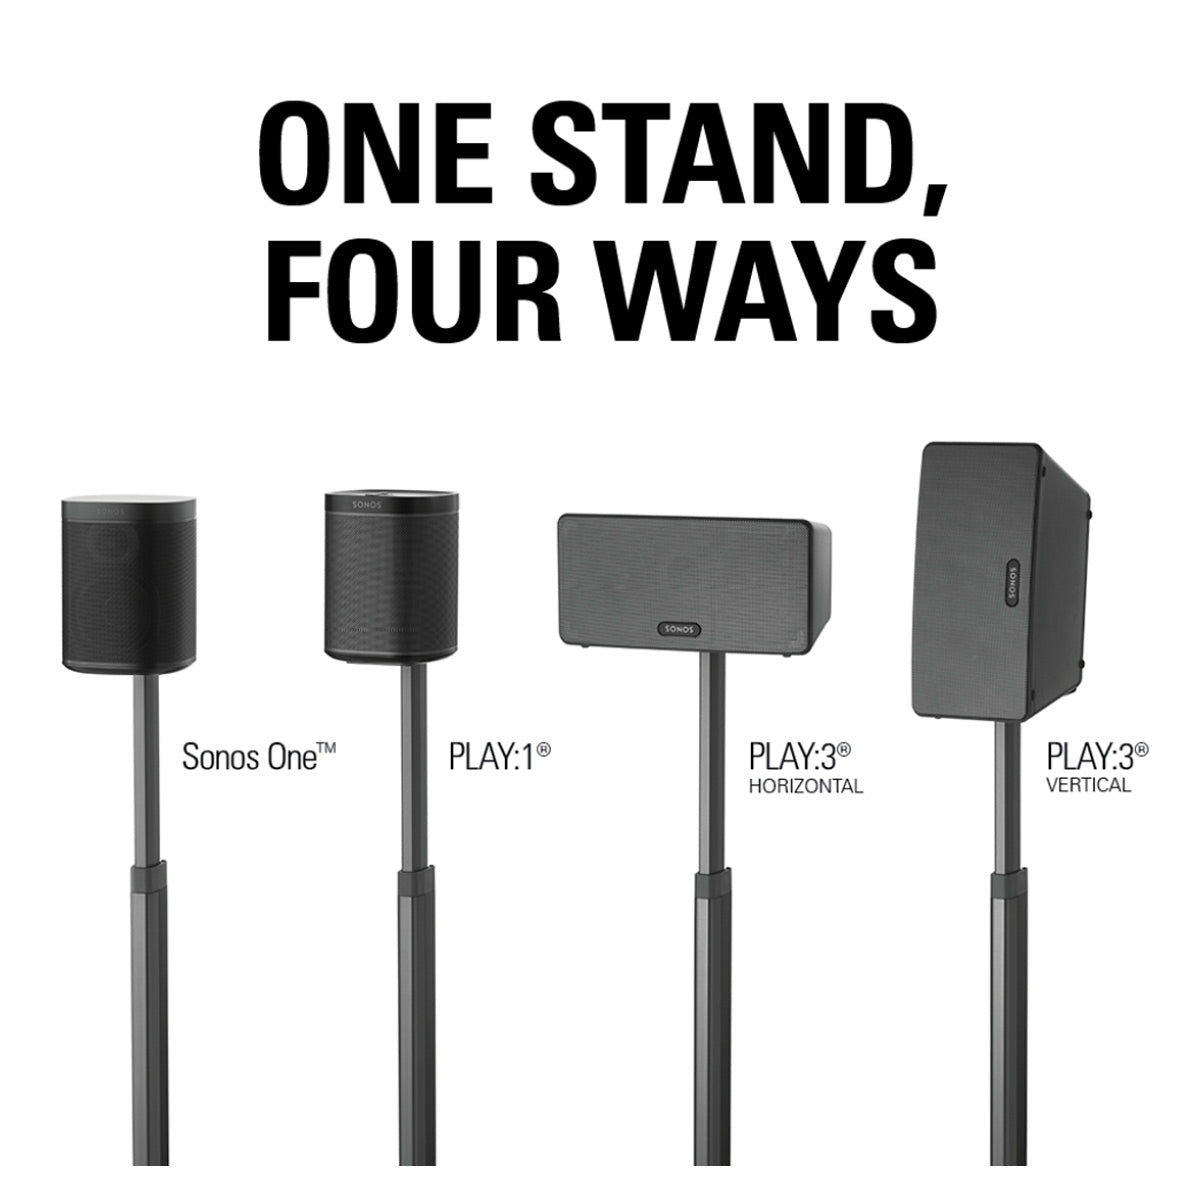 Sanus WSSA1 Height-Adjustable Wireless Speaker Stand for Sonos ONE, PLAY:1, and PLAY:3 - Each (Black)